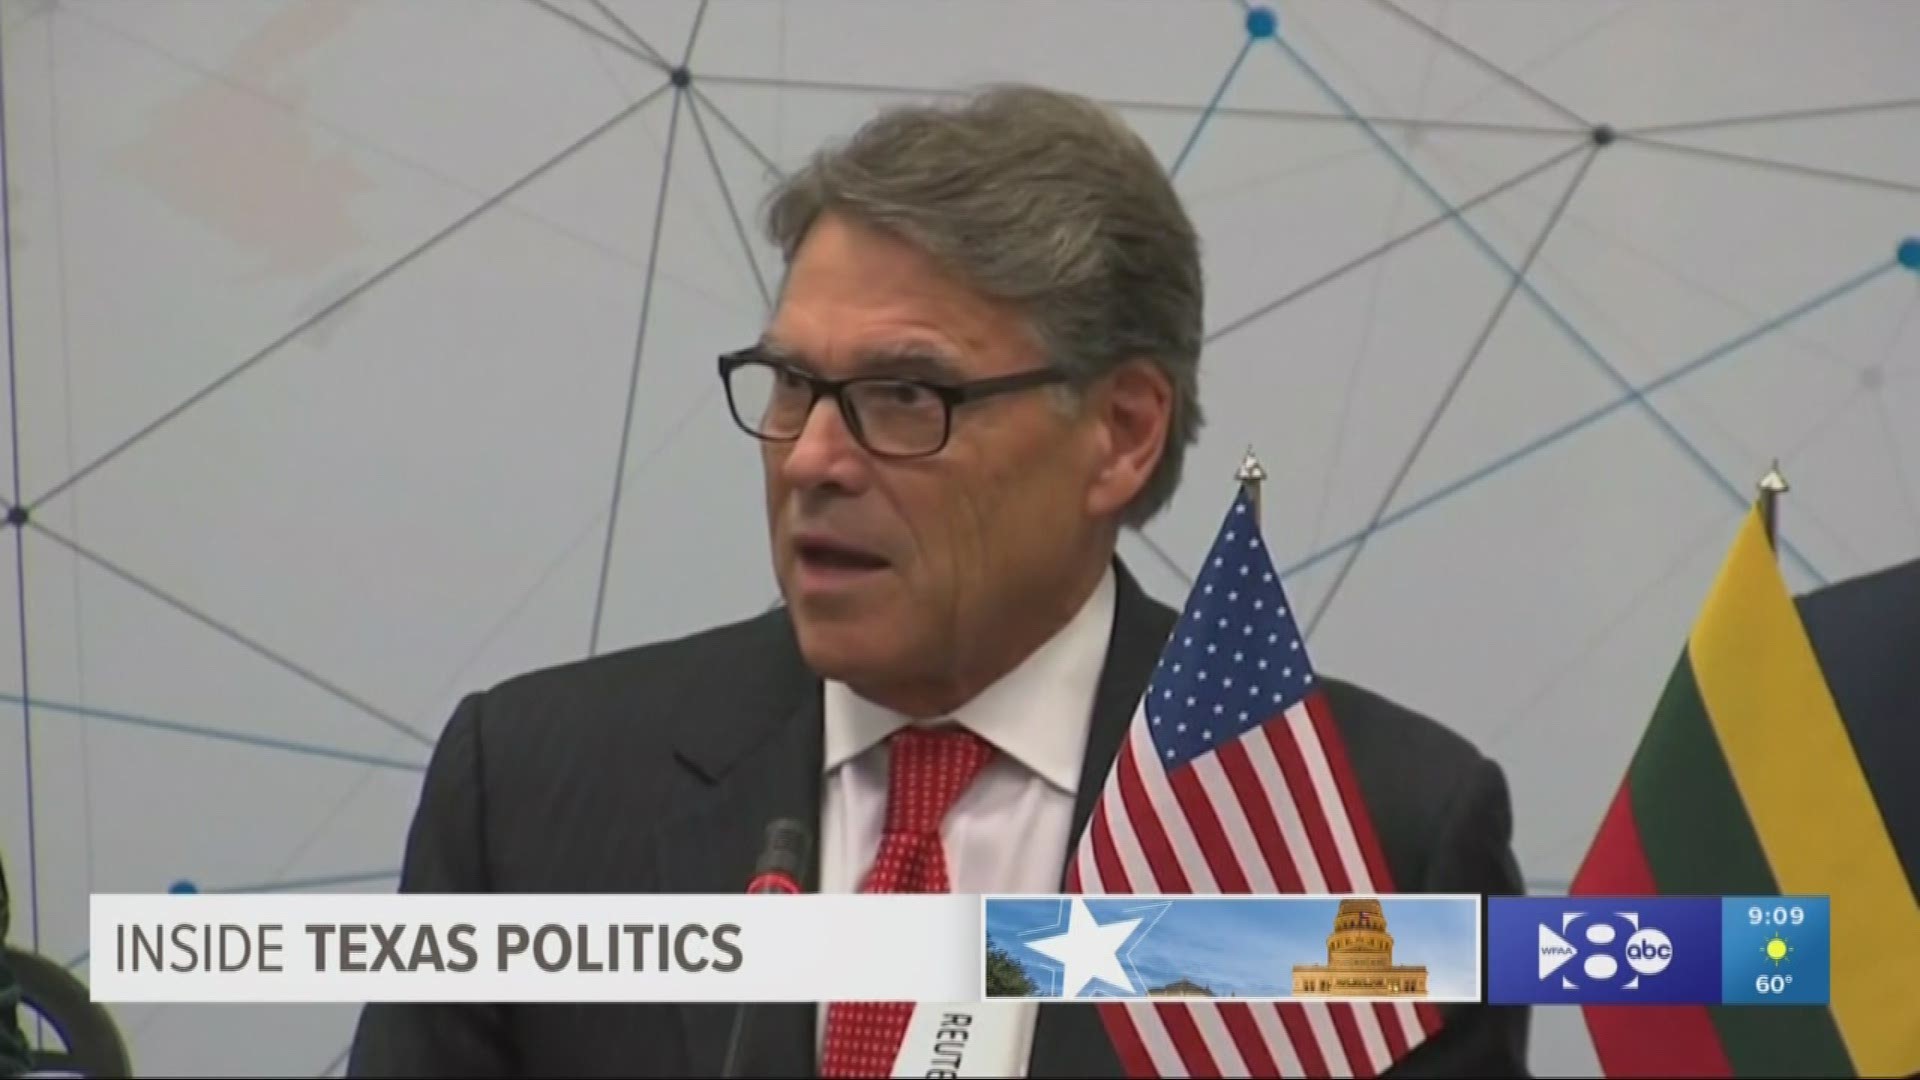 Ross Ramsey from the Texas Tribune joins Inside Texas Politics to discuss Perry's resignation.